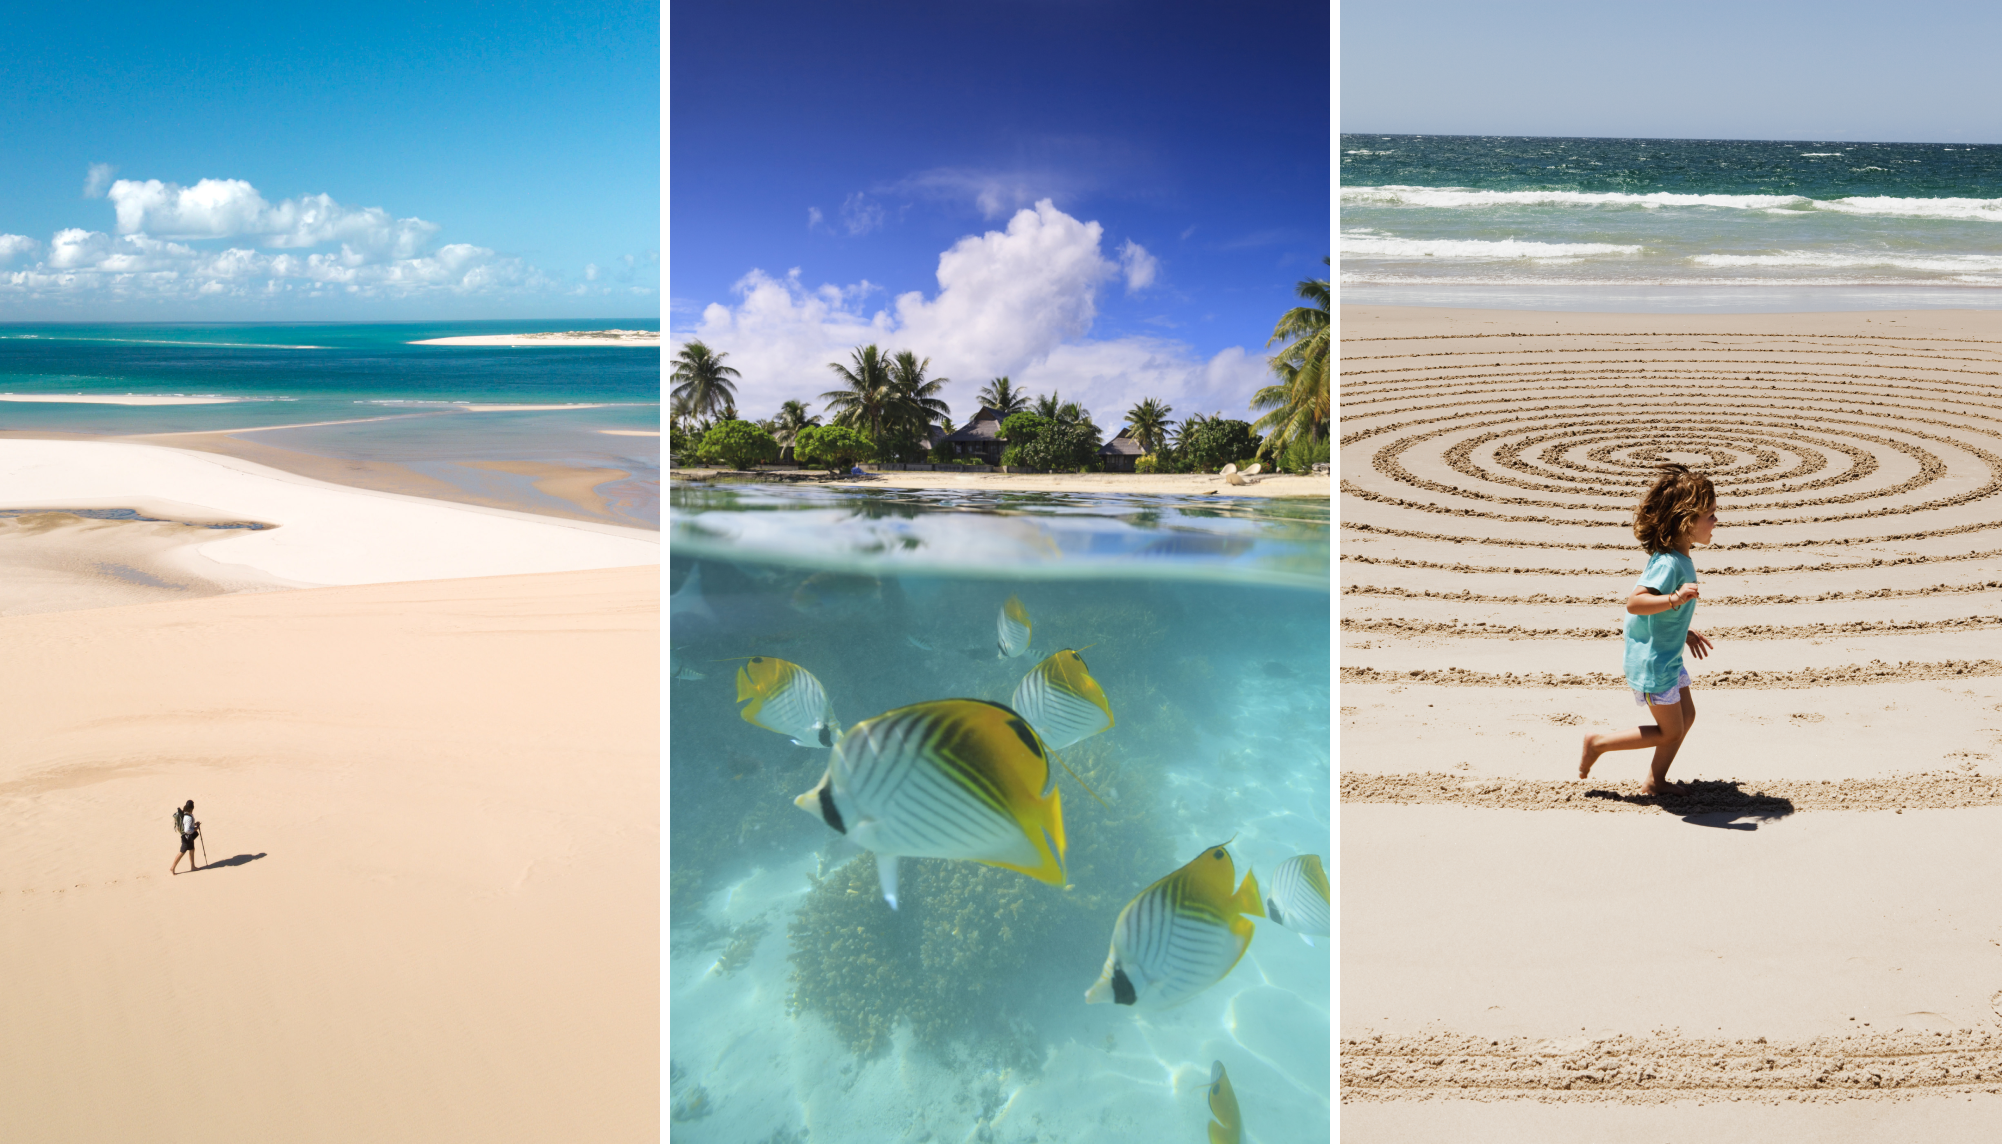 The sand of the Bazaruto Archipelago; the clear waters of Bora Bora; the sandy beaches of Byron Bay.